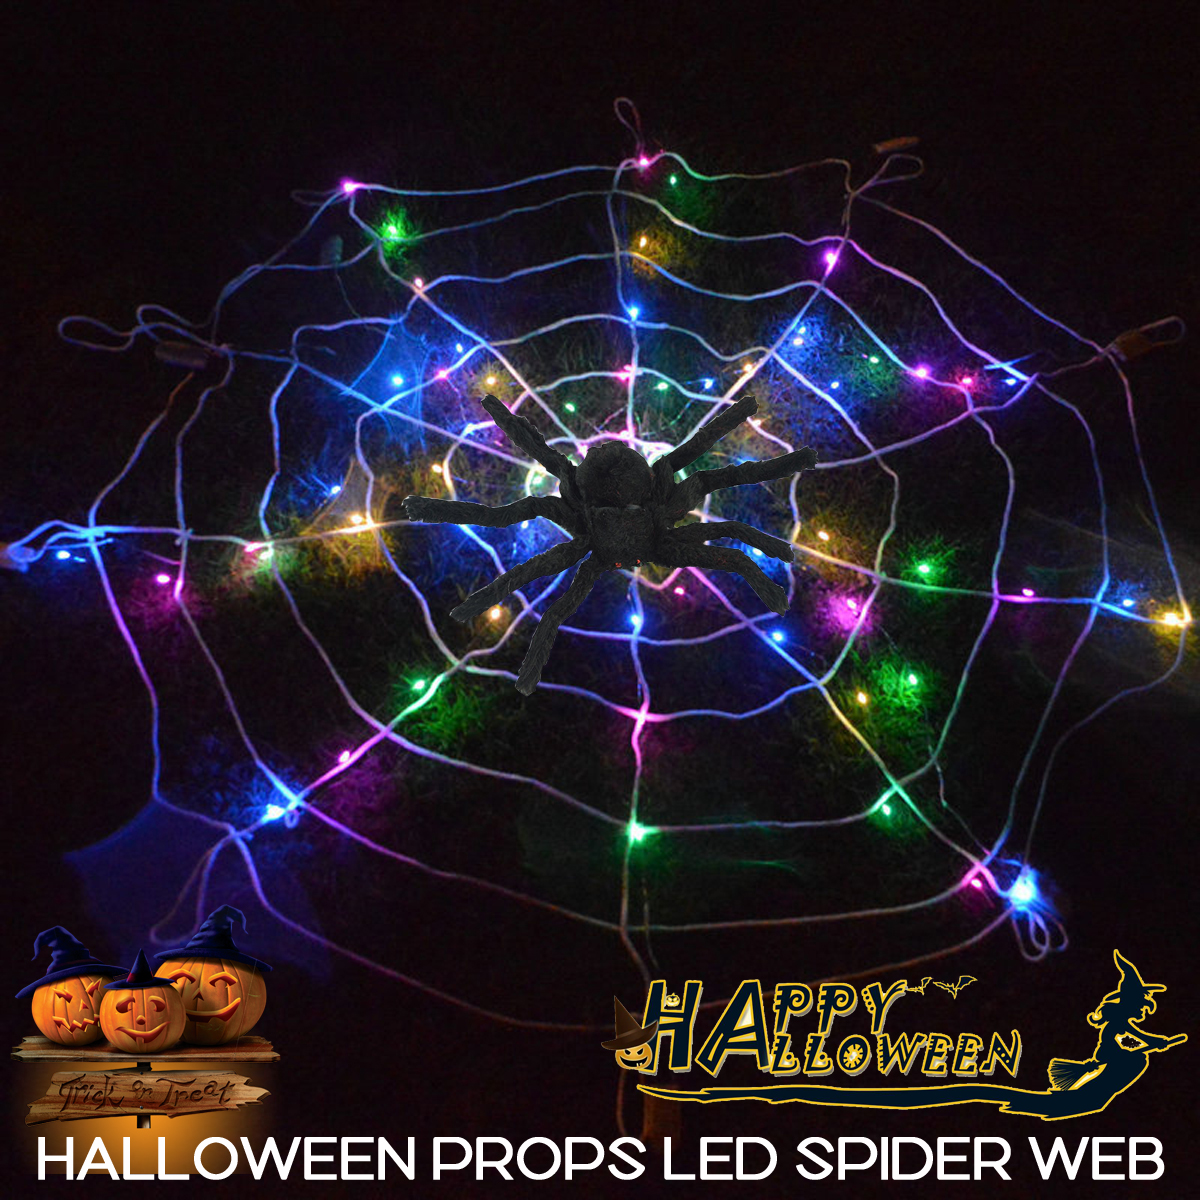 Halloween-LED-Spider-Web-String-Light-Outdoor-Horror-Party-Props-Lamp-Cobweb-Spooky-Decor-1754369-1